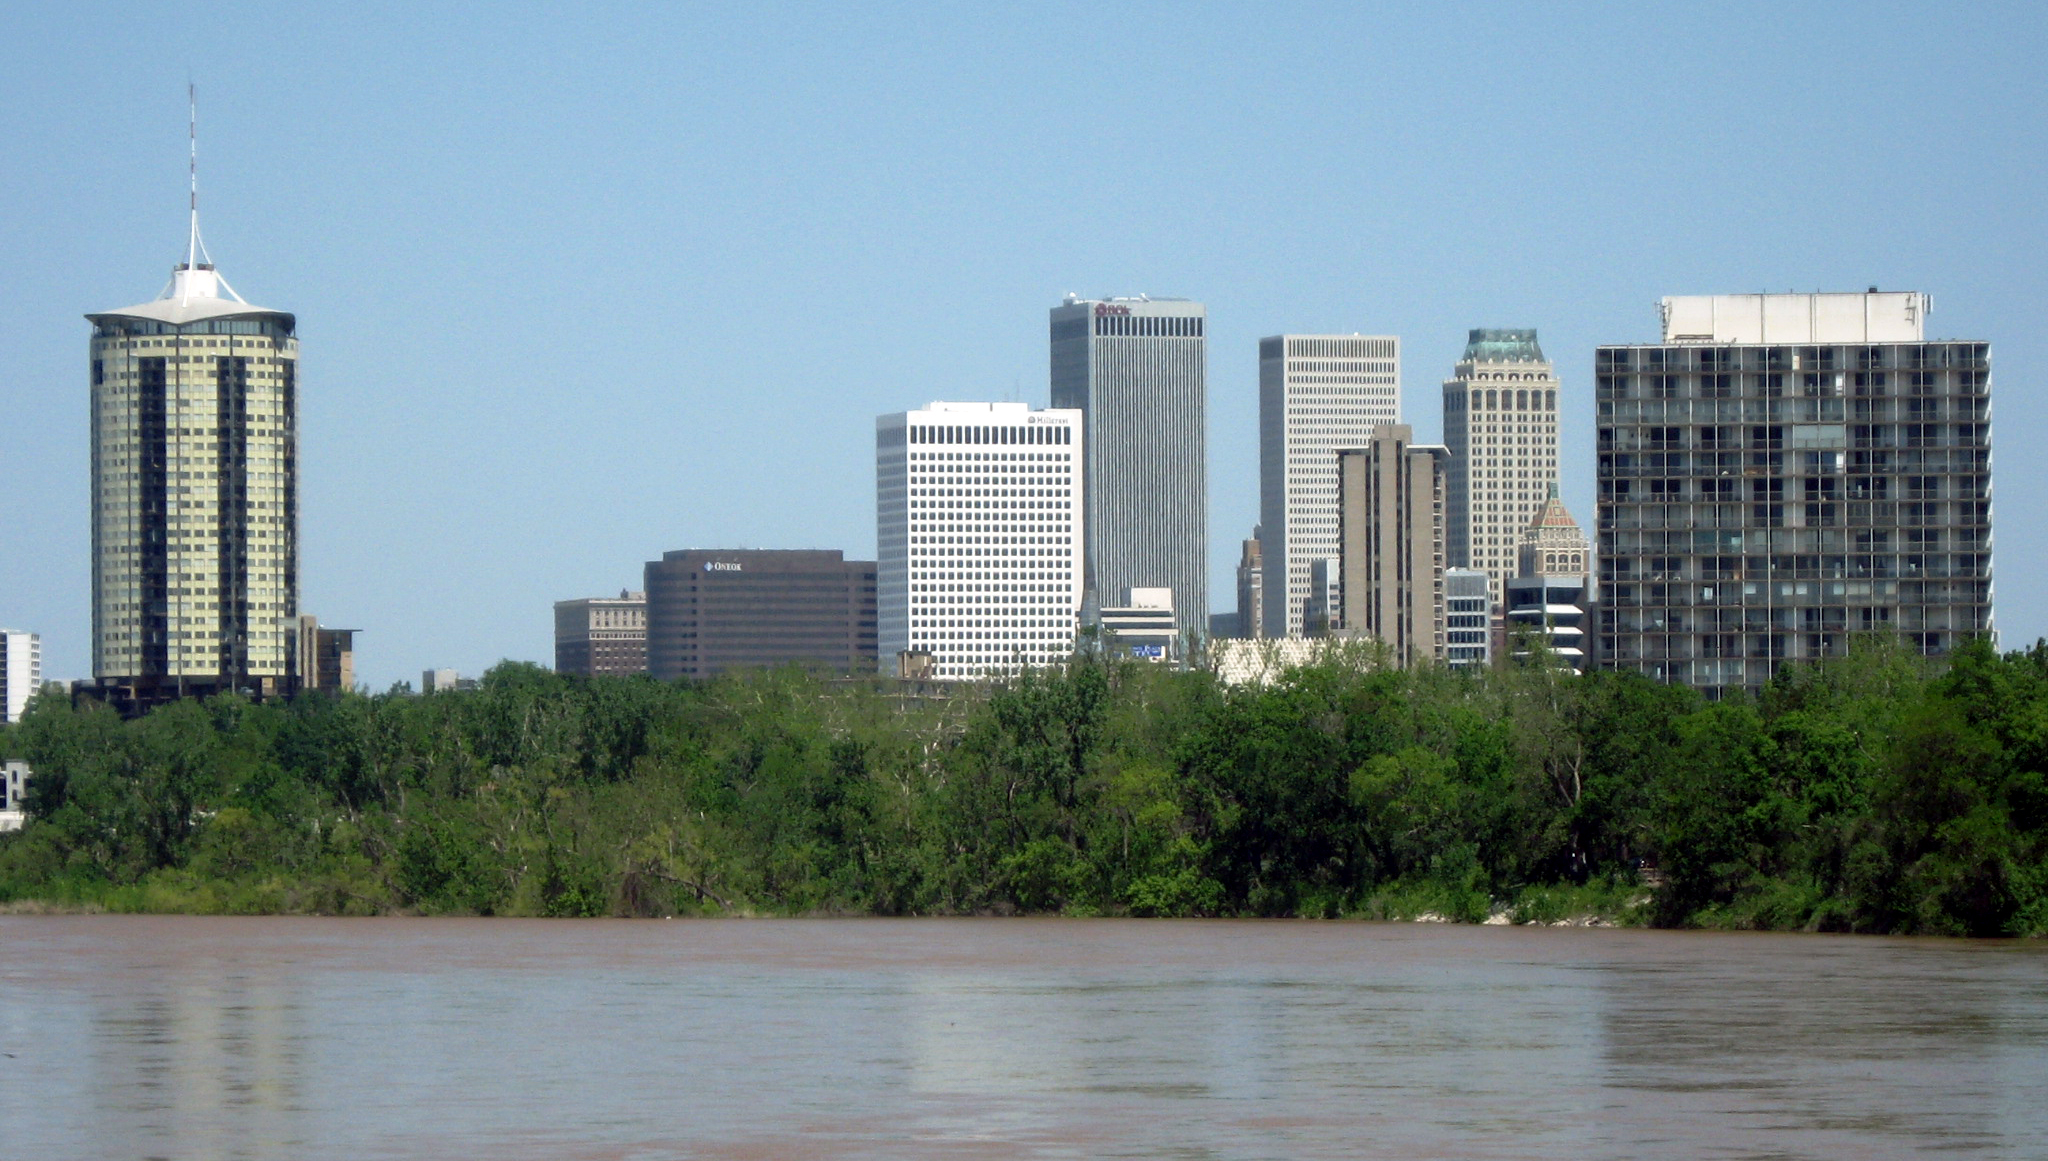 Tulsa, Oklahoma. In 1974, flood victims pressured the city government to reduce flood damage, which ballooned into a major program to make the city more disaster-resistant and sustainable that continues to this day. By 1992, Tulsa had the lowest flood insurance rates in the country. 